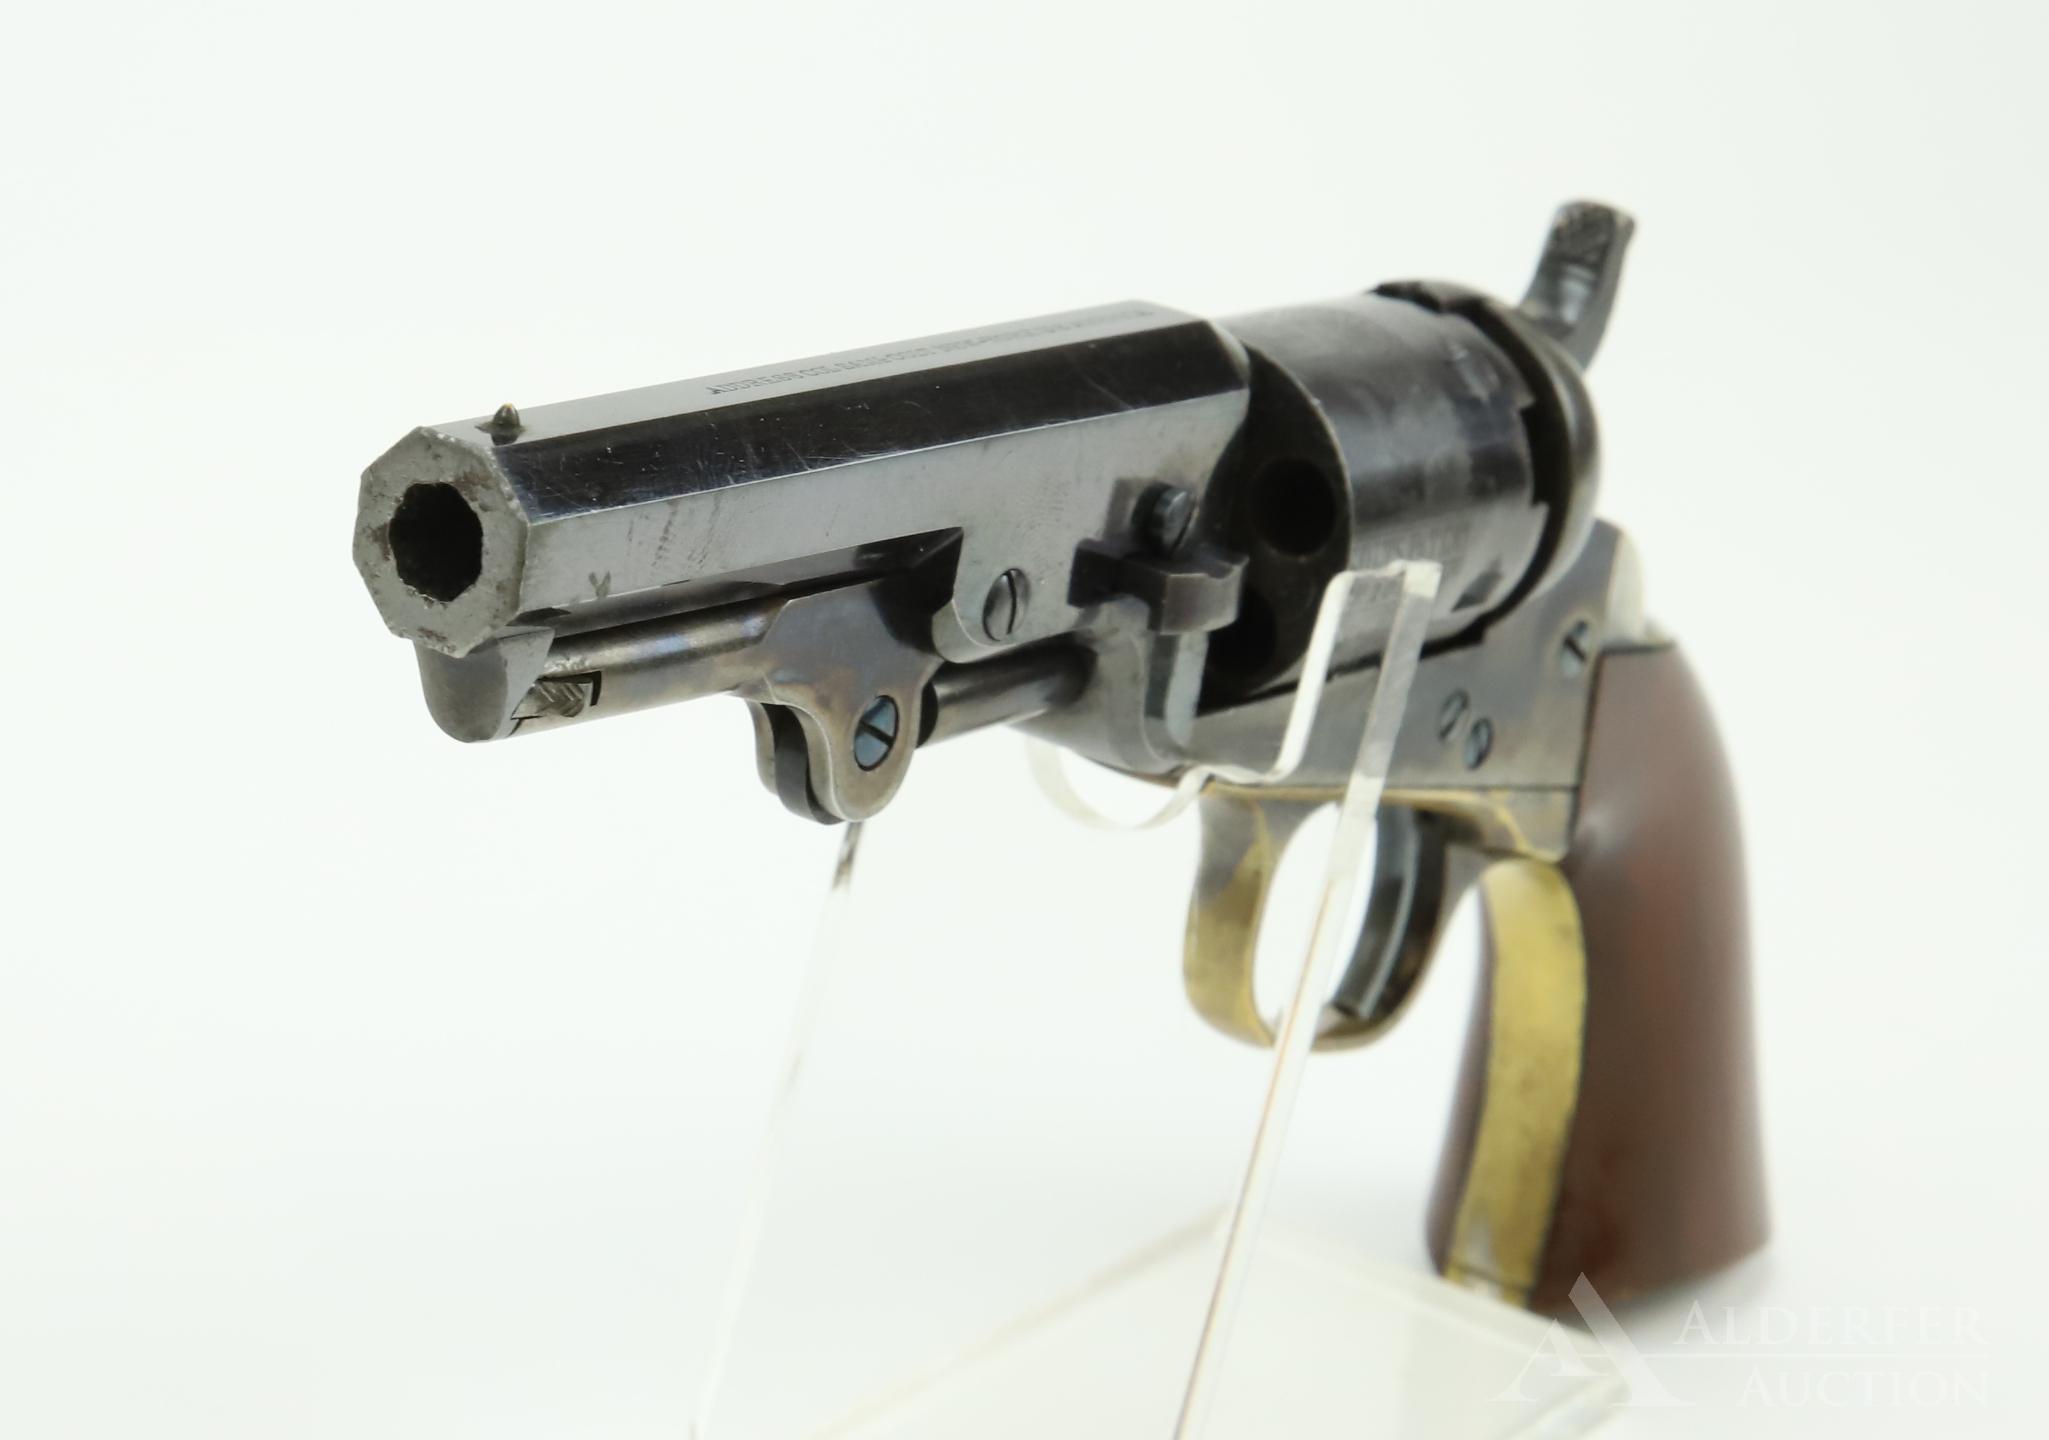 Cased Colt Model 1849 Pocket Revolver with Accoutrements